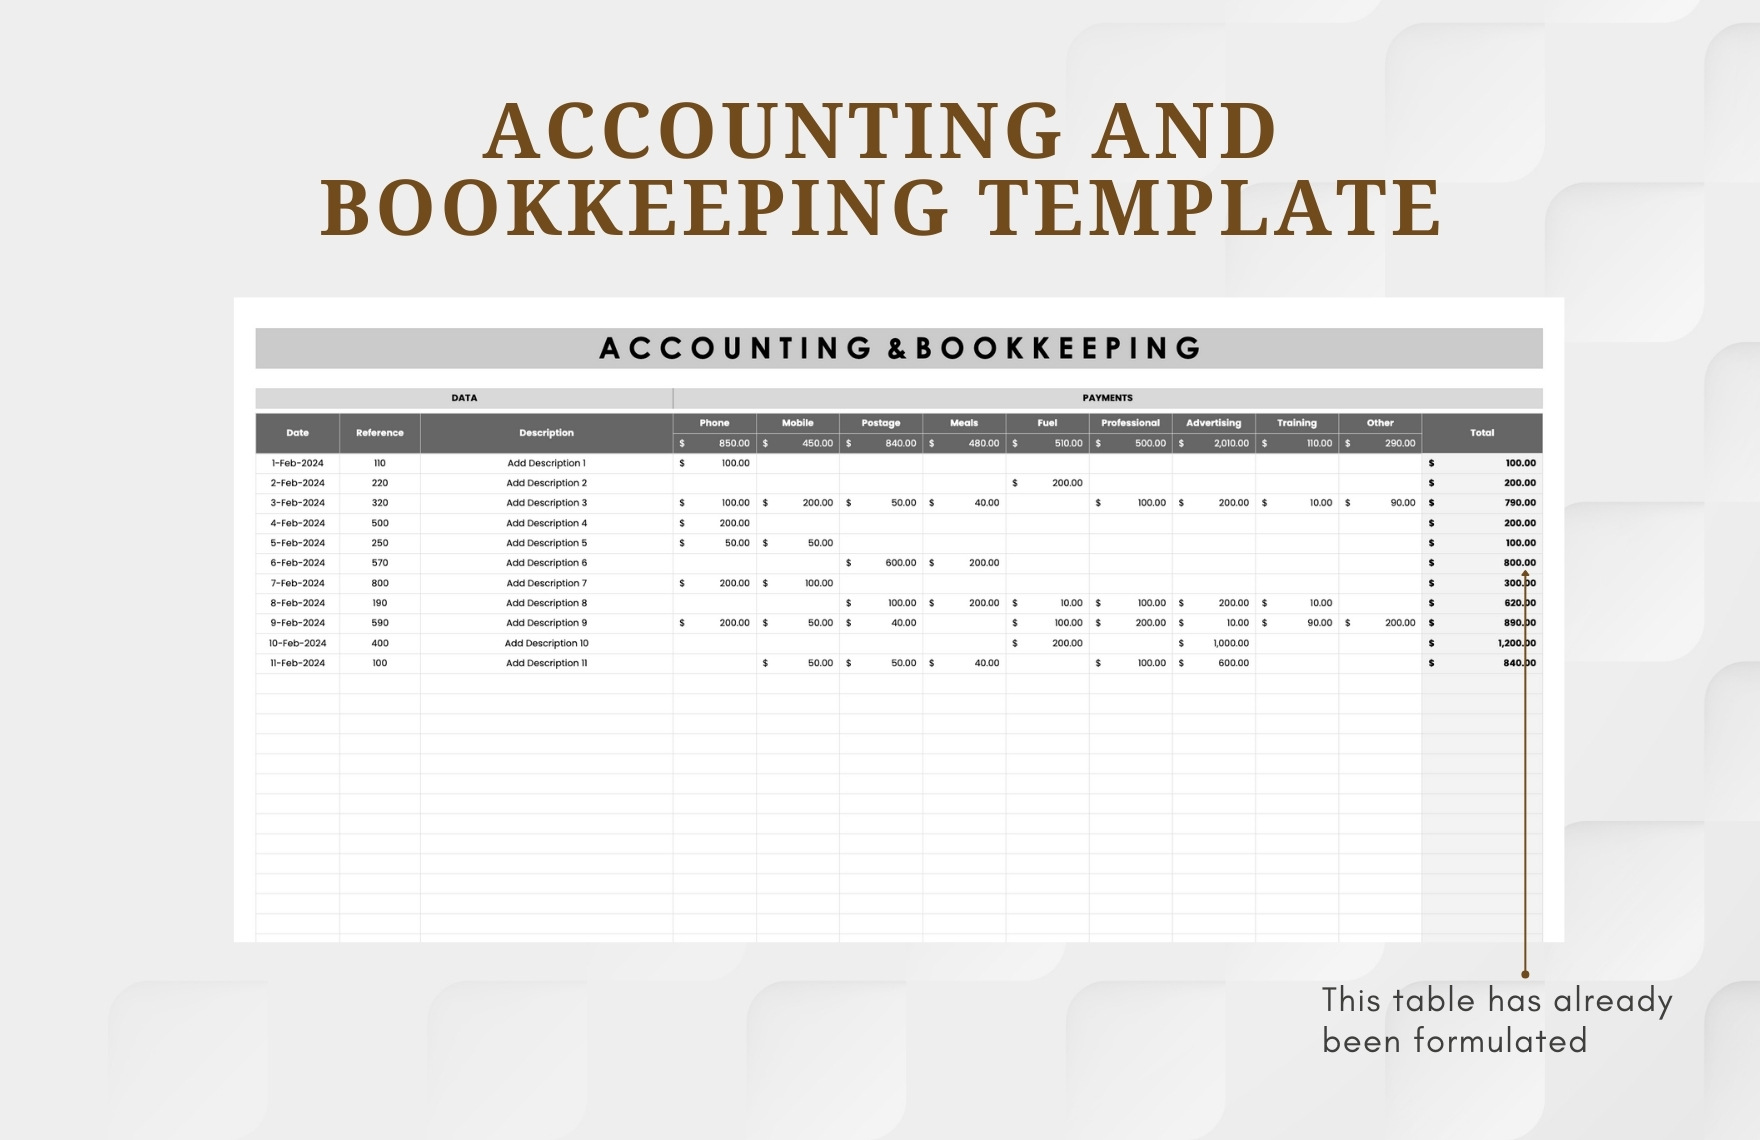 Accounting and Bookkeeping Template